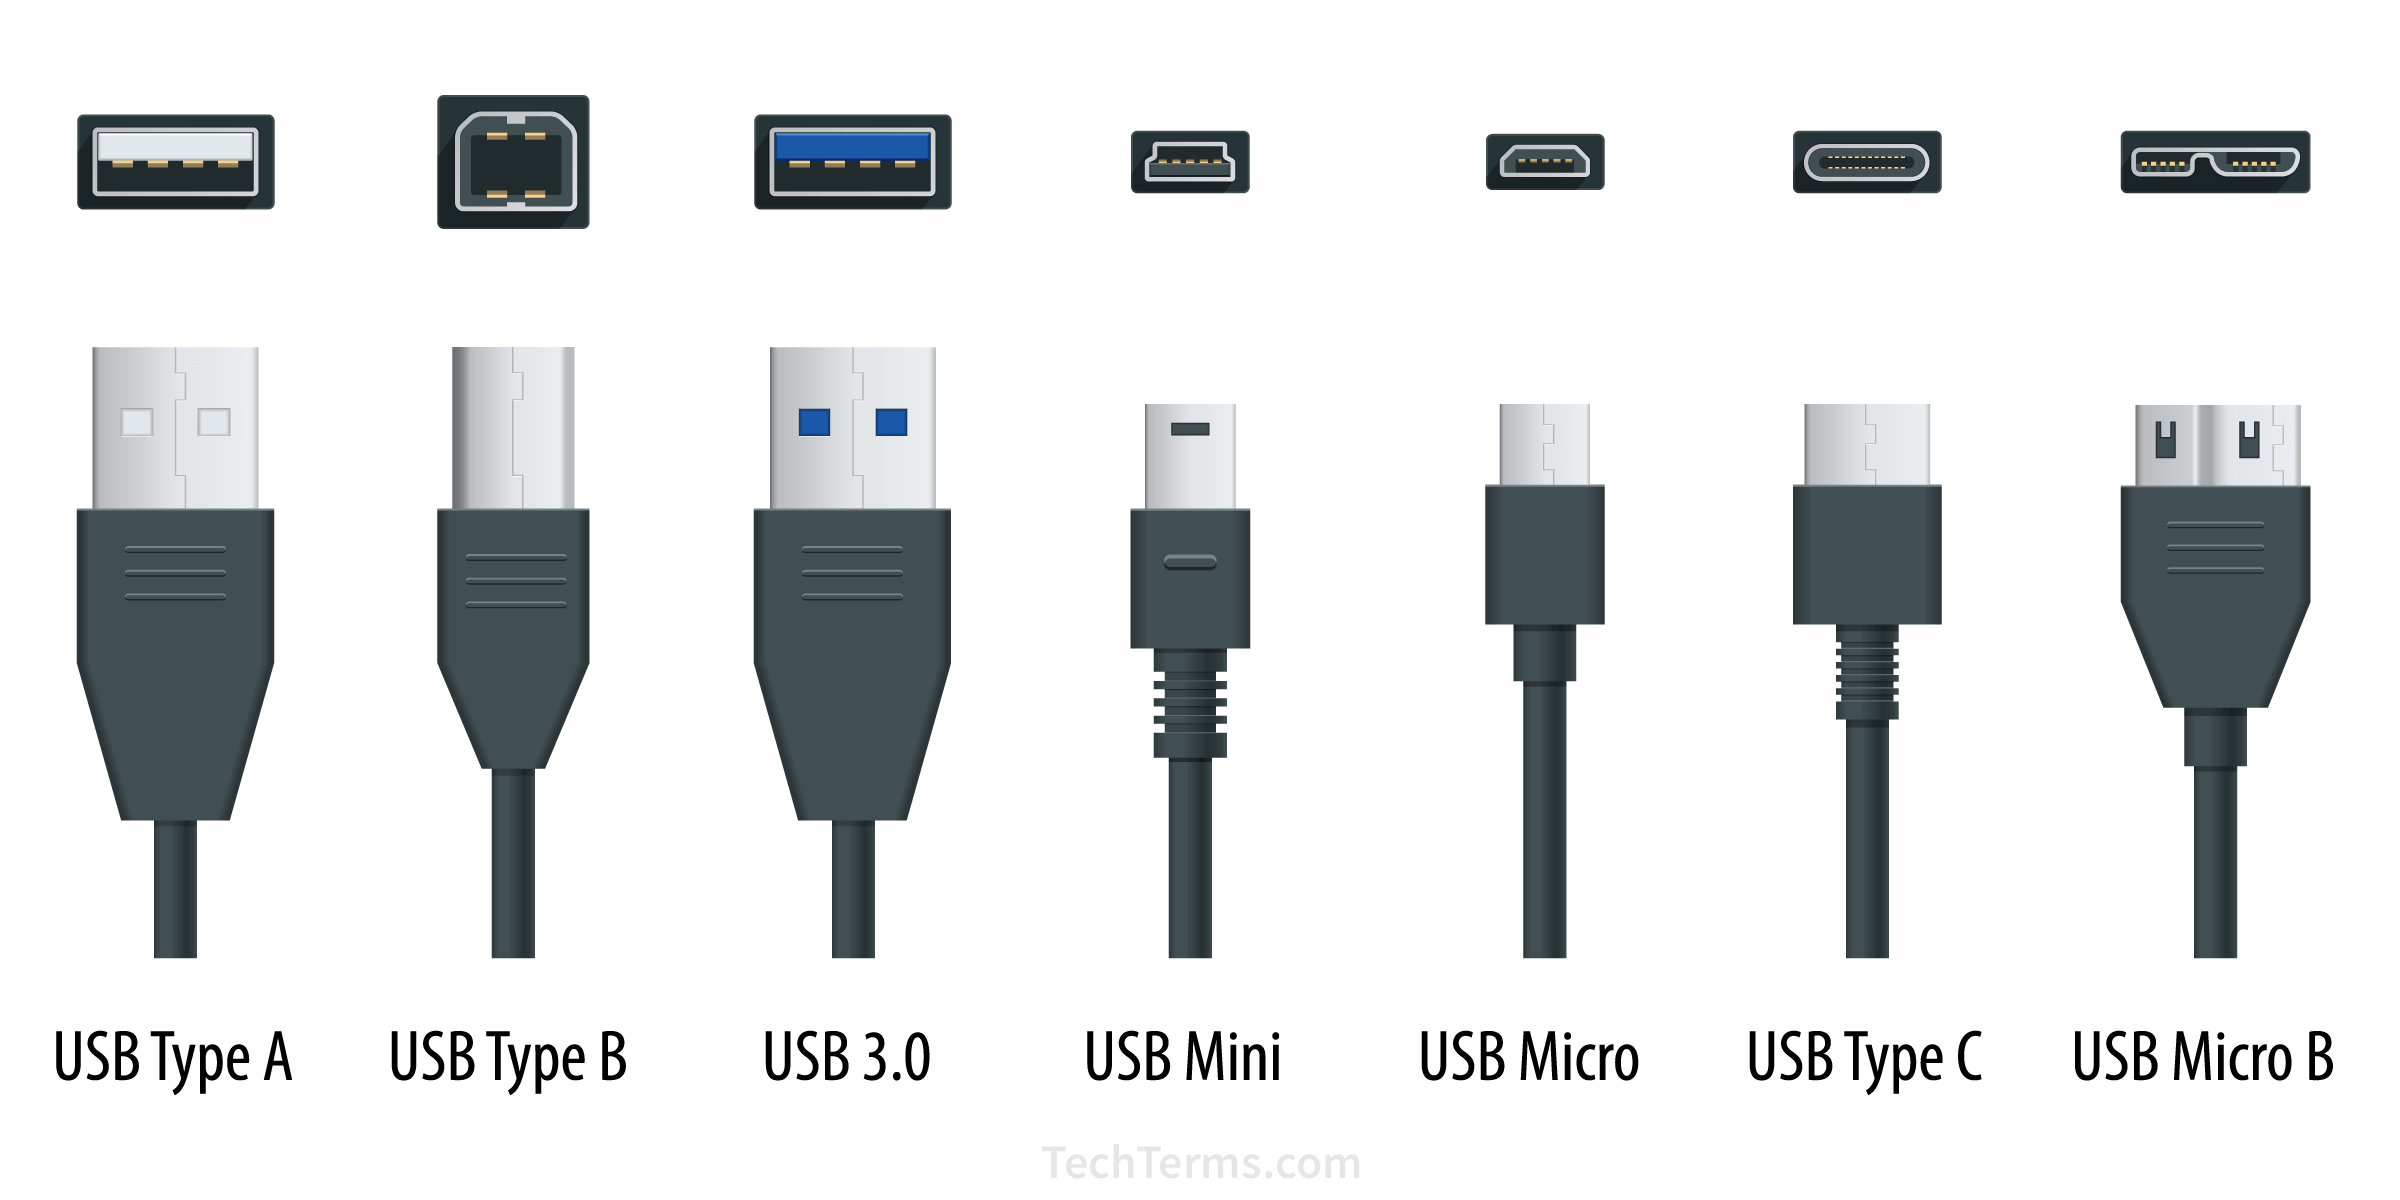 ned sprede Manifold The USB Connectors: Upbeat Journey Of USB 1.0 To USB 3.1 - Inventiva